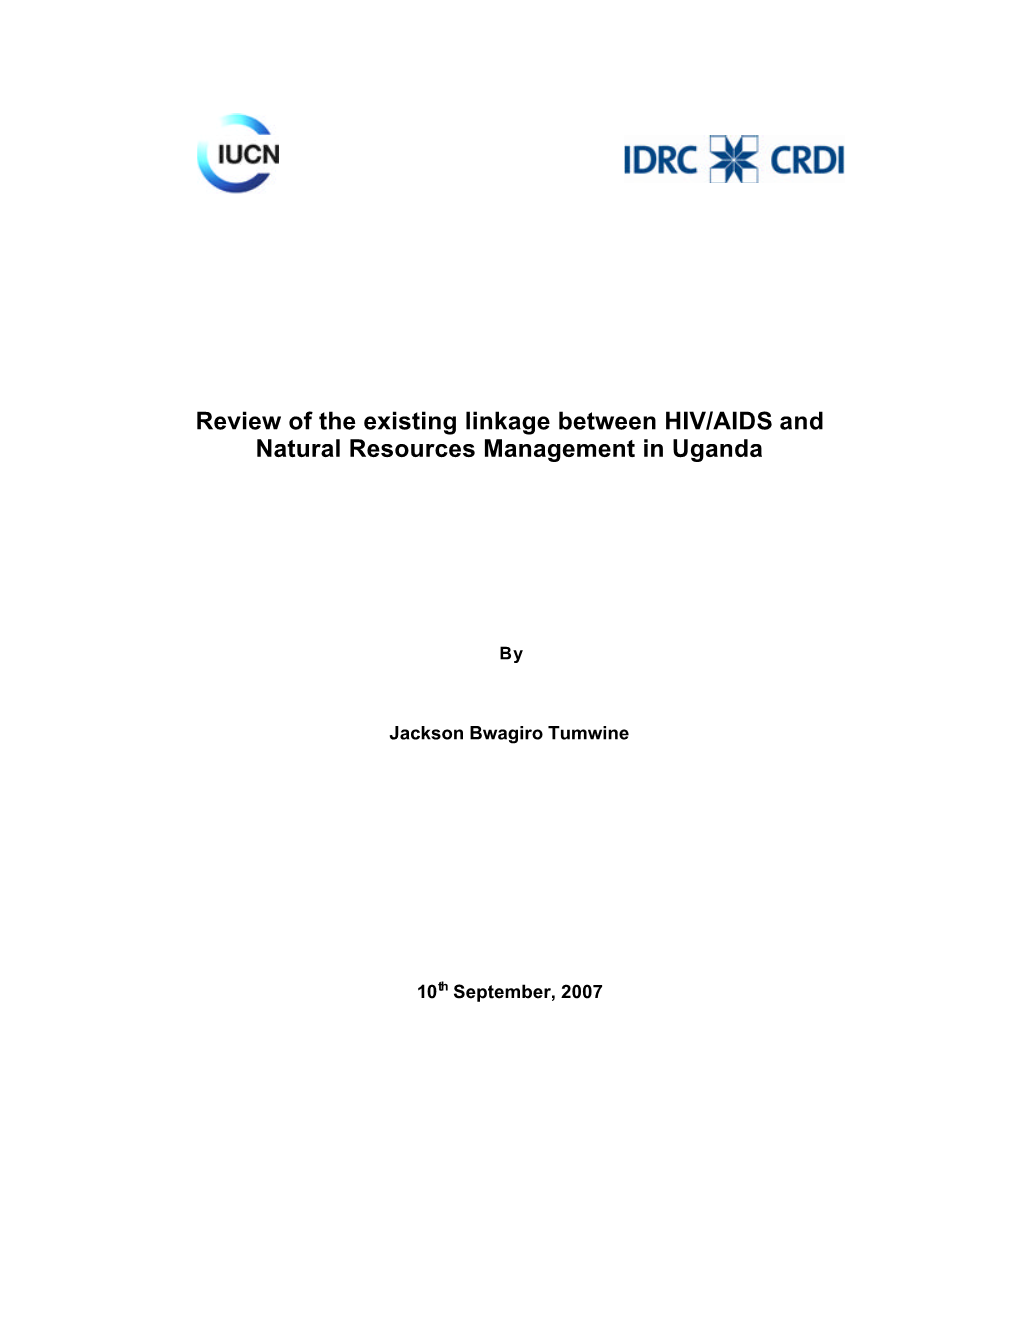 Review of the Existing Linkage Between HIV/AIDS and Natural Resources Management in Uganda